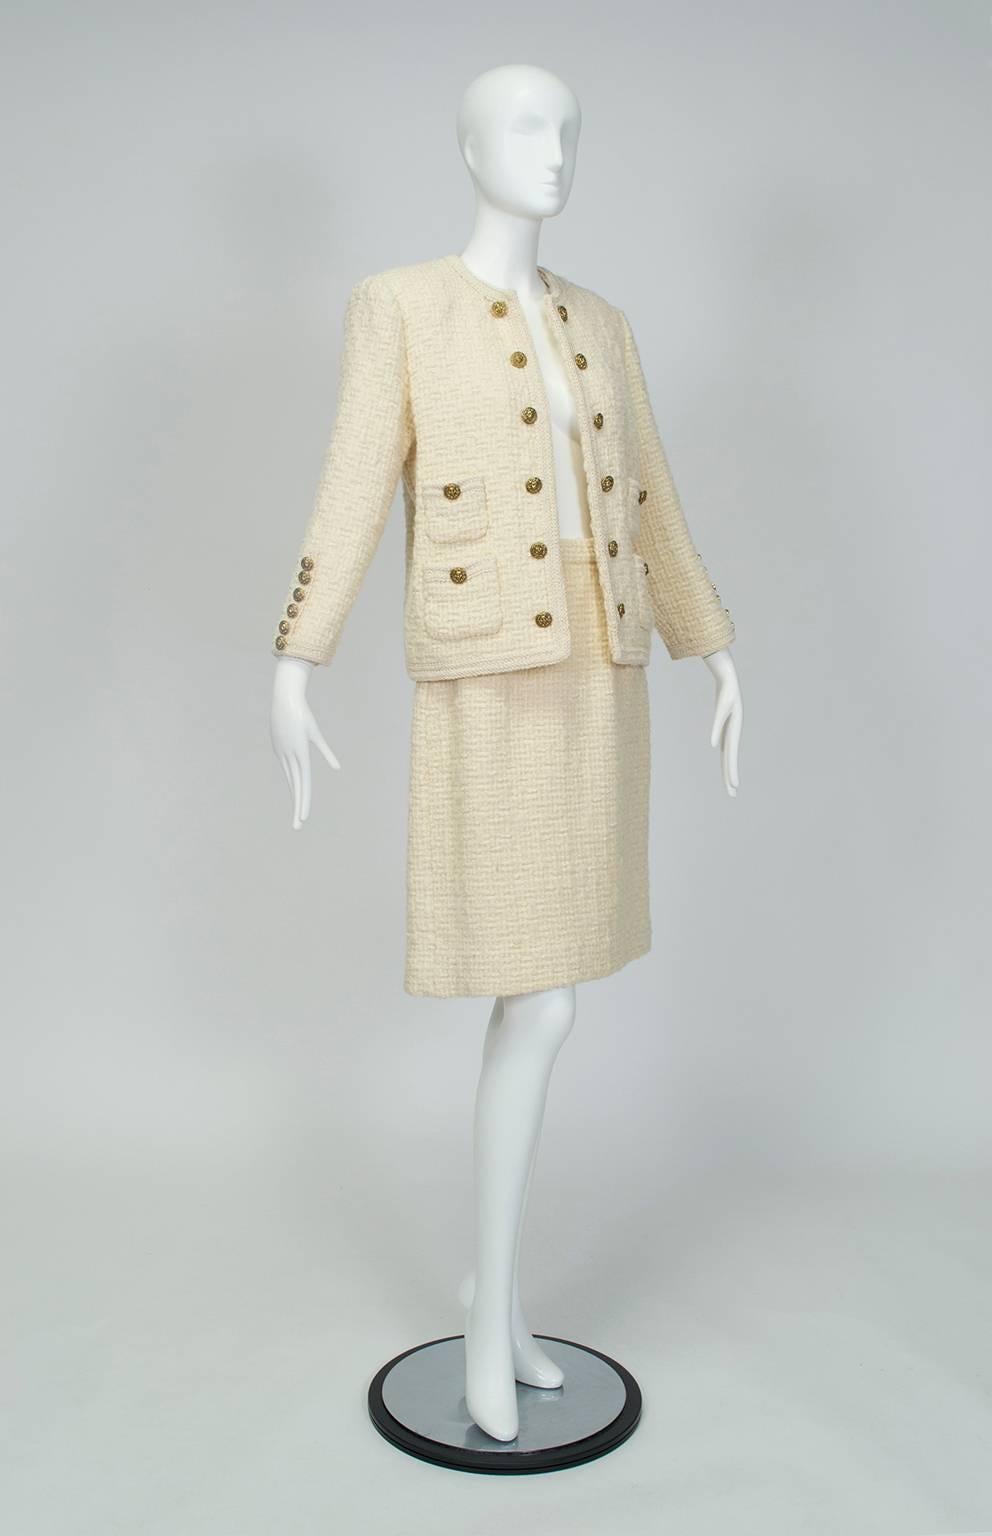 Though a facsimile of the real thing, this extraordinary (and extraordinarily heavy!) skirt suit is a dead-ringer for one of the 